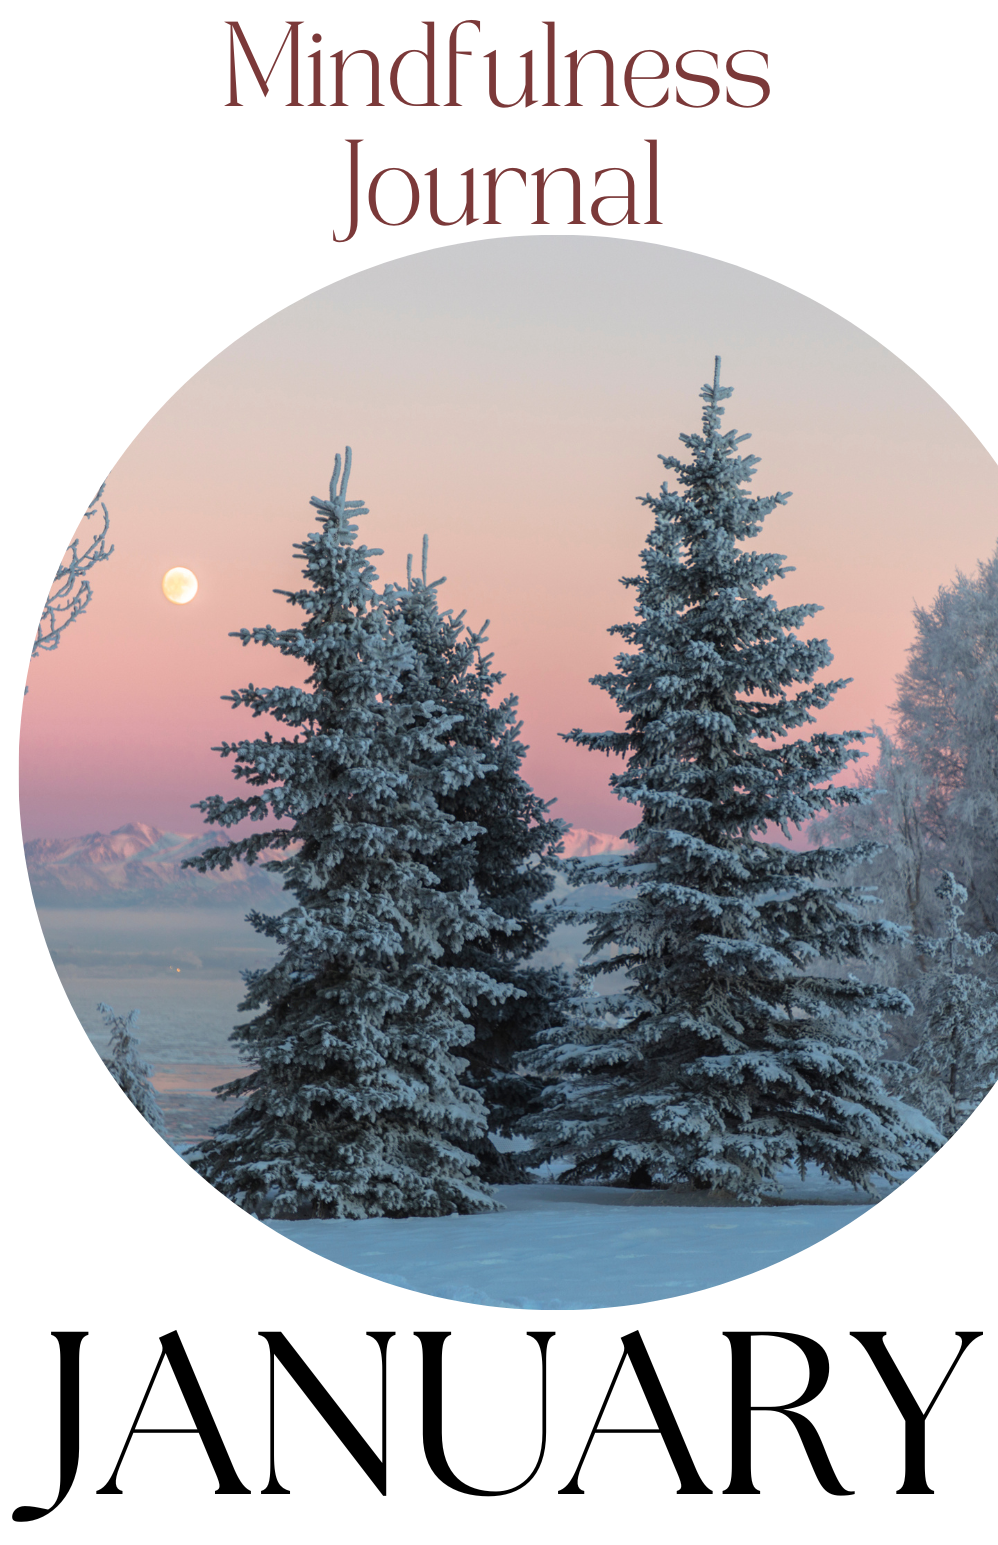 The cover to January's Mindfulness Journal, which features a snowy landscape with snow covered pine trees and a setting sun in the background.